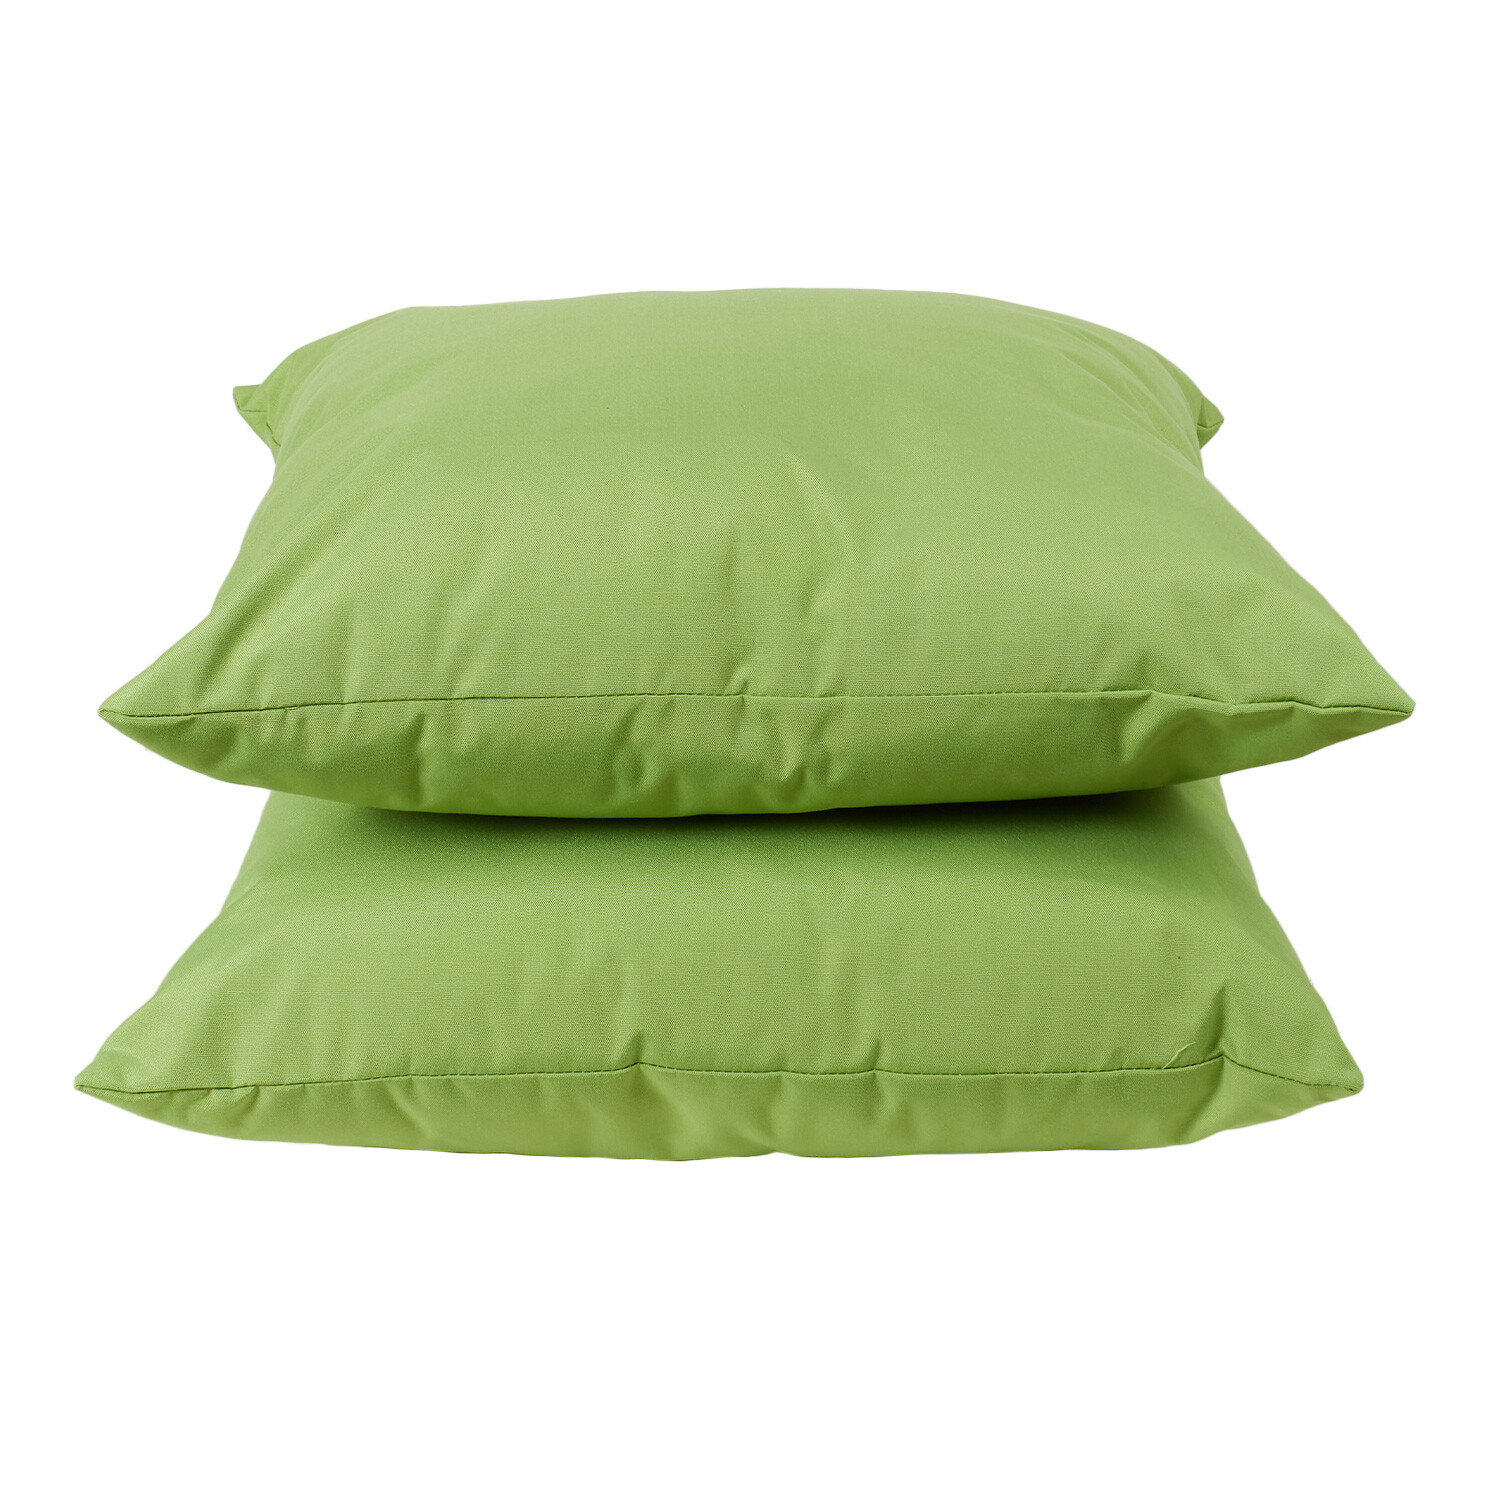 Essential Outdoor Cushions - Green Image 2